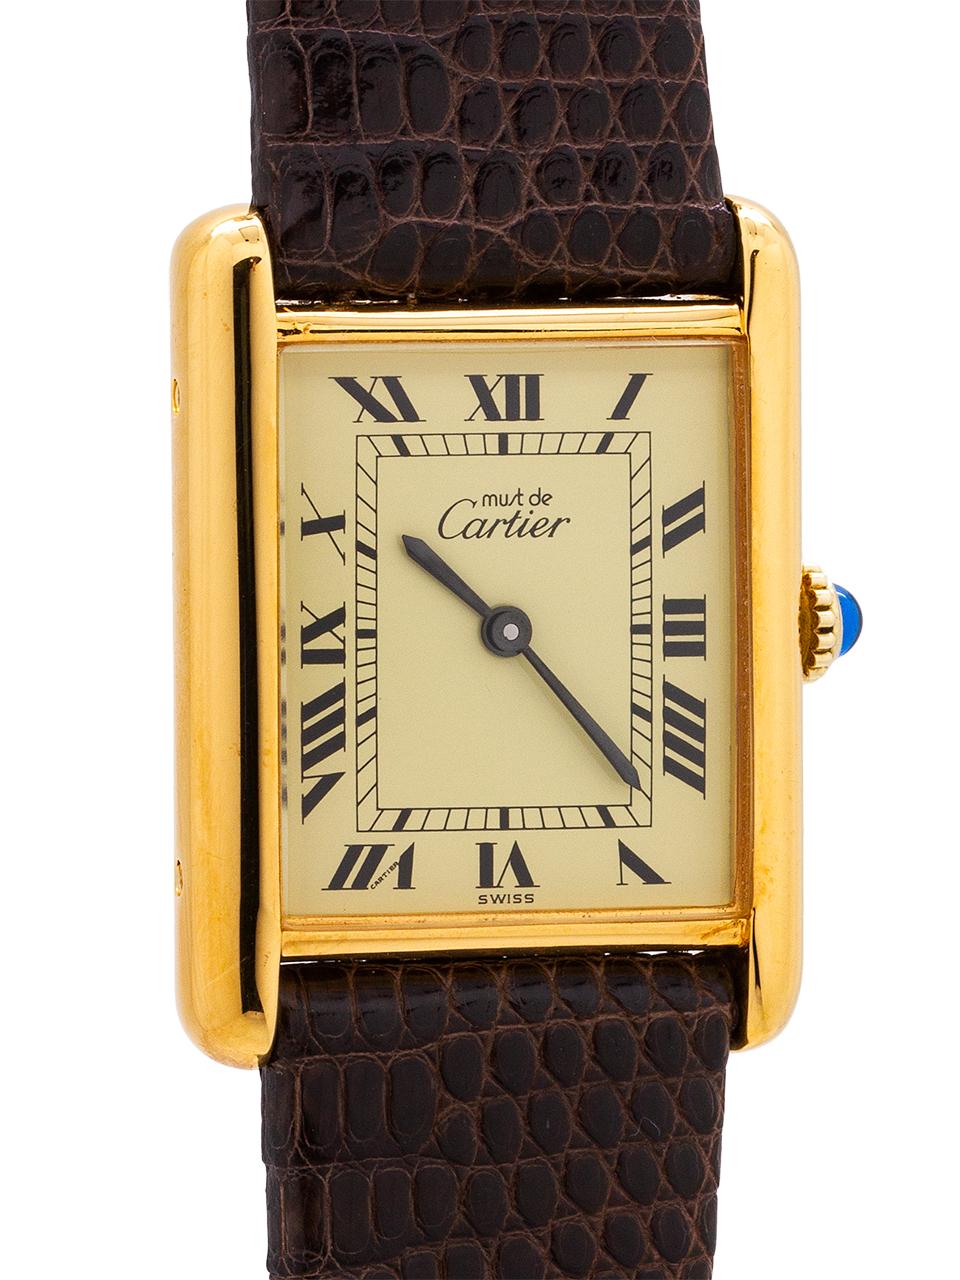 
Cartier Man’s Tank Louis circa 1990s. Featuring 24 x 30mm vermeil (20 microns gold over silver) case secured by 4 side screws. Featuring classic cream color dial signed Must de Cartier with printed black Roman numerals and blued steel hands.